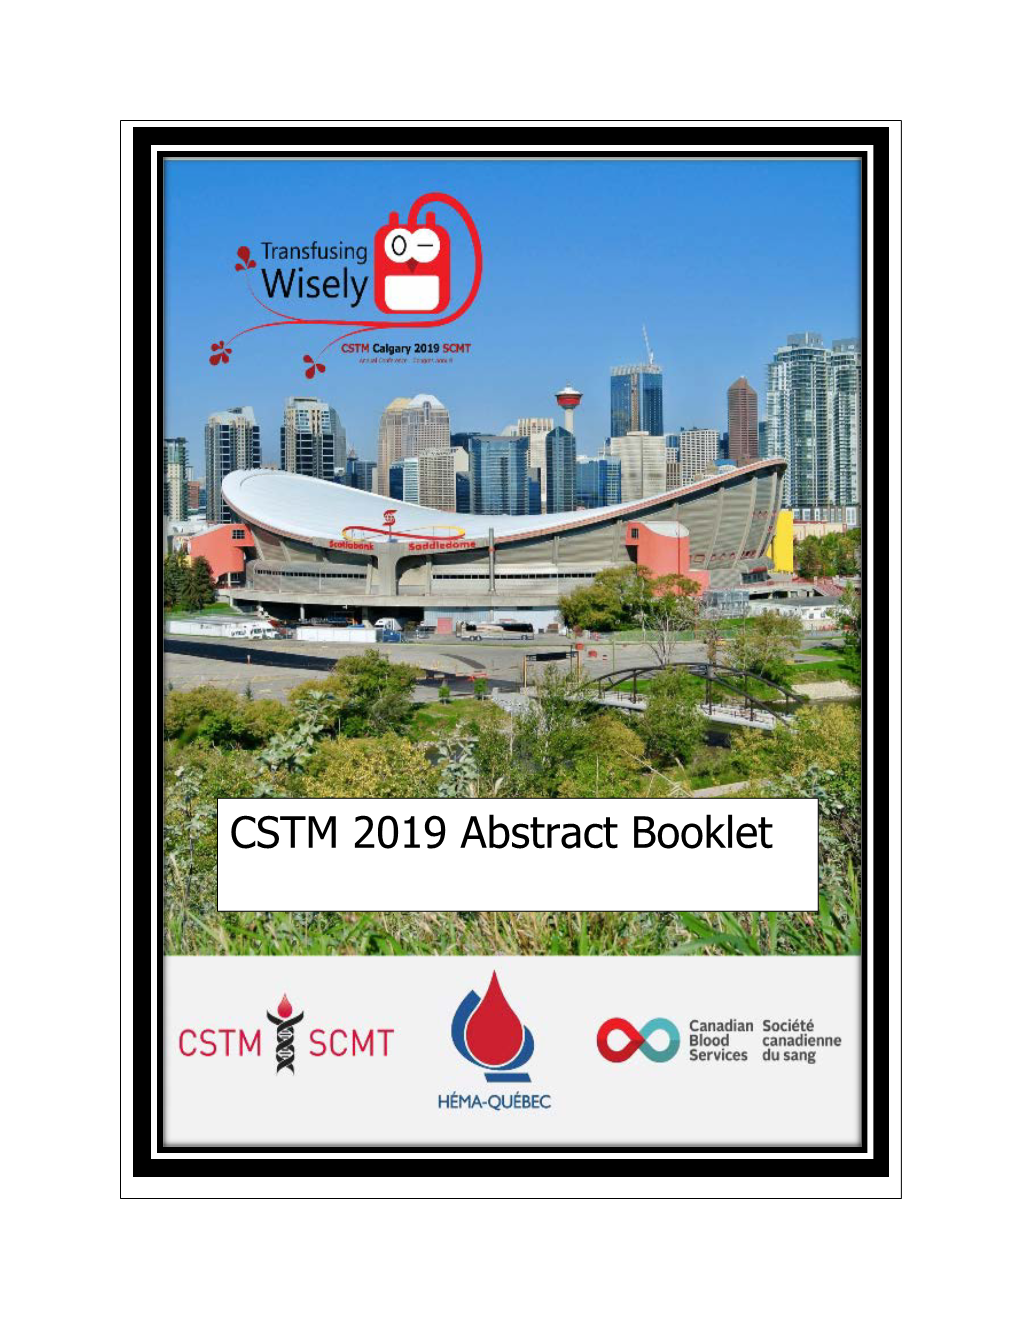 CSTM 2019 Abstract Booklet